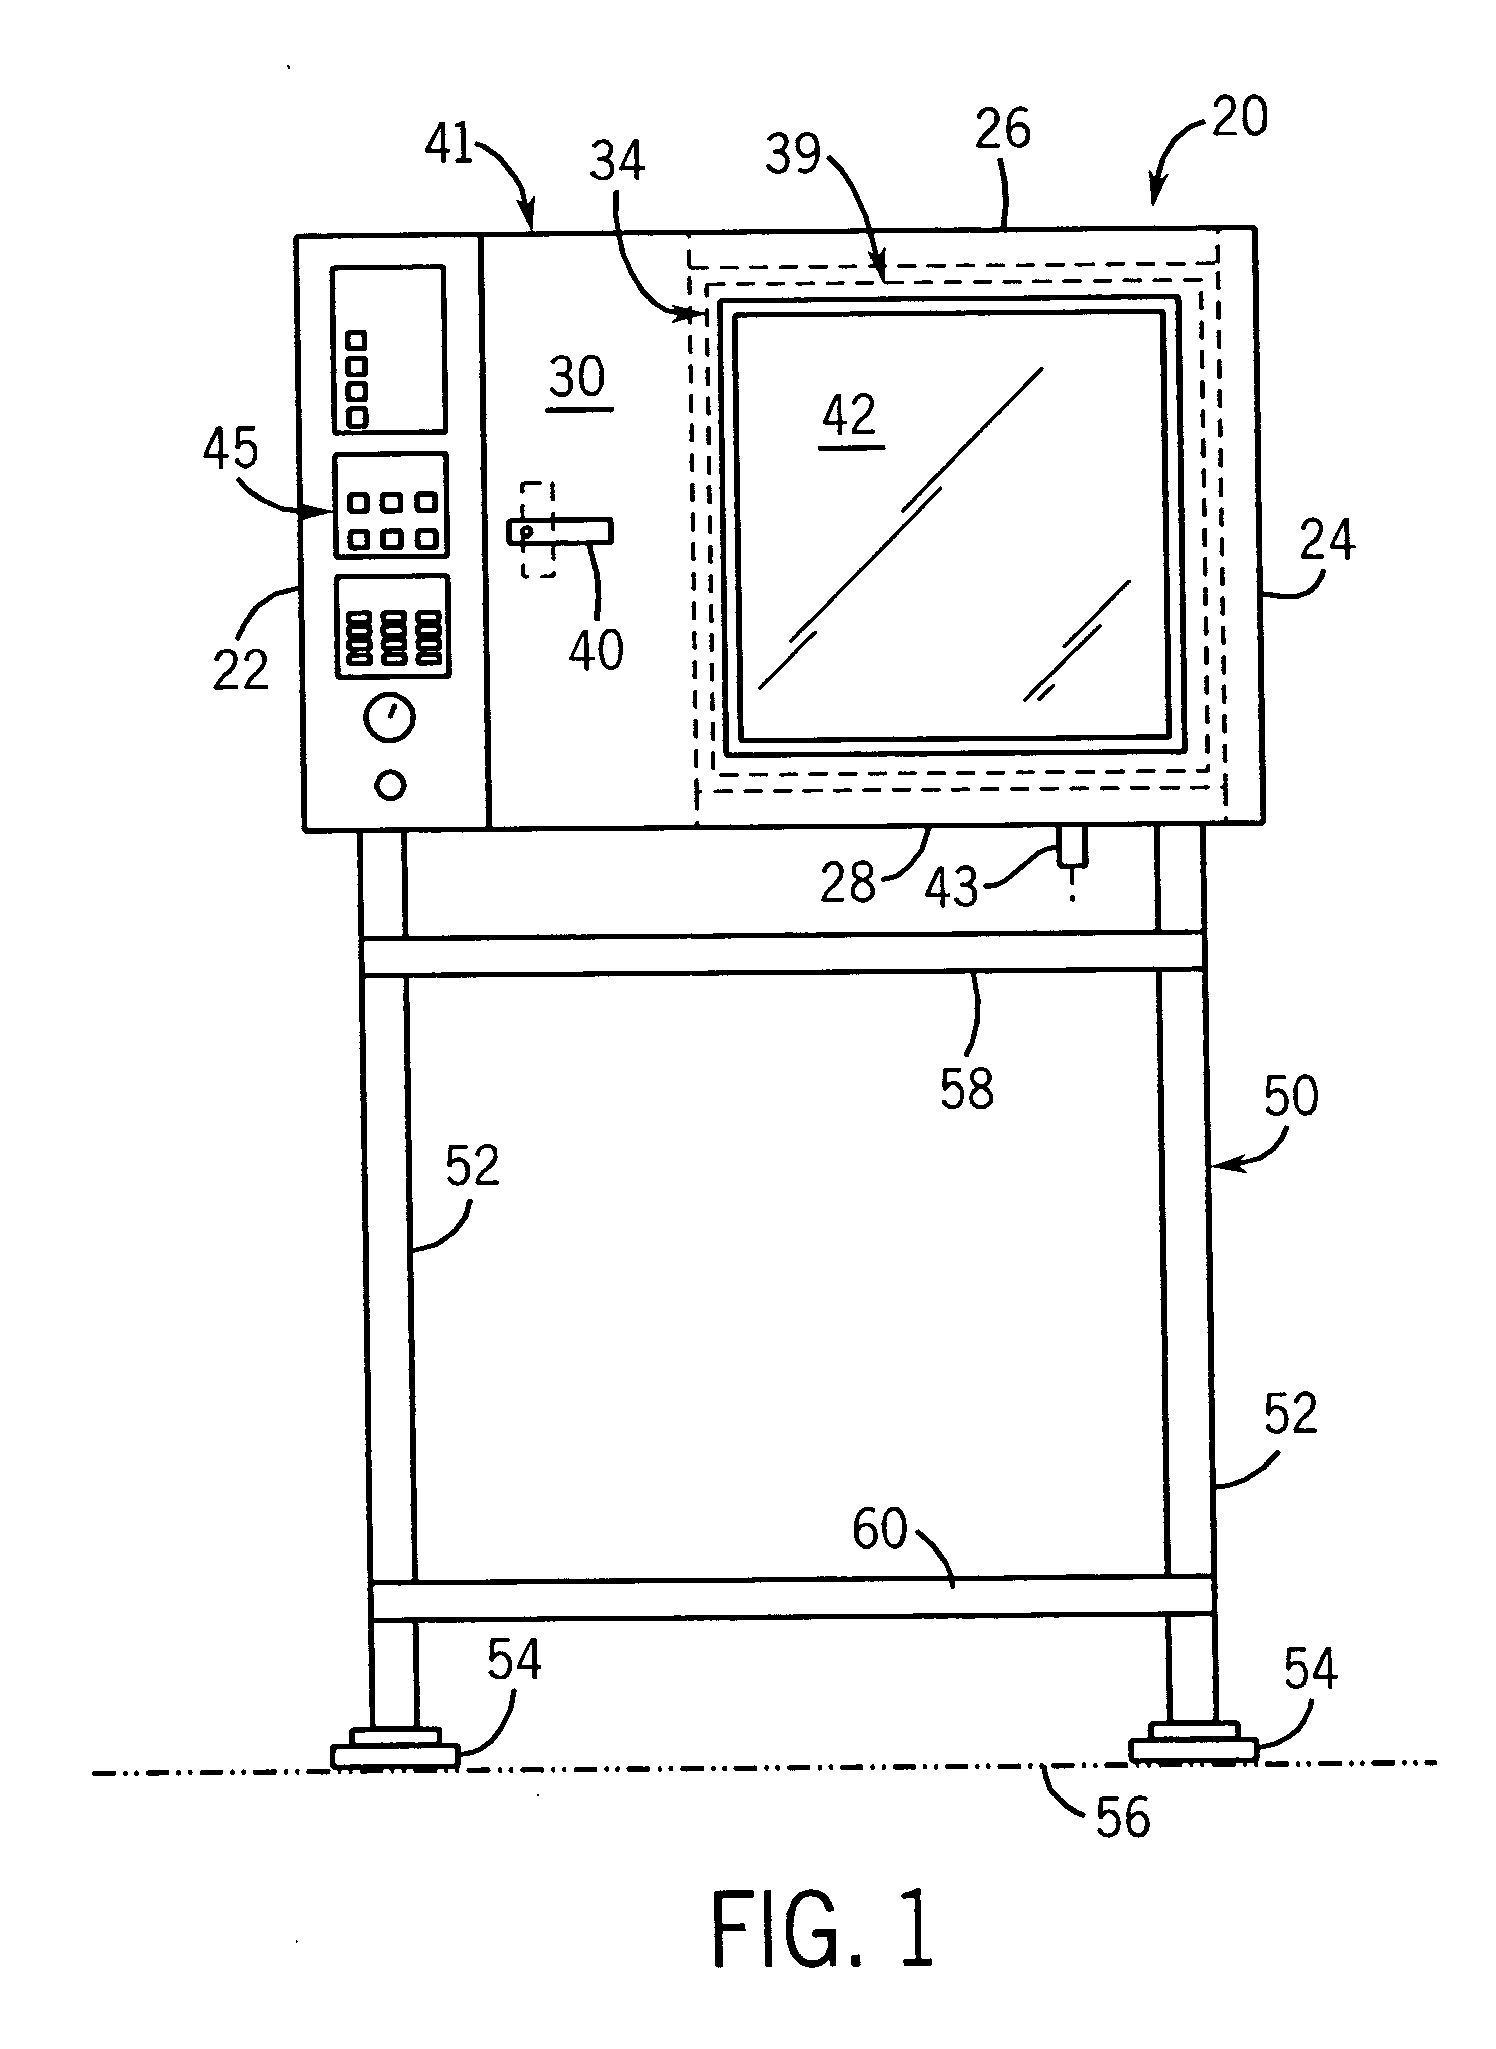 Oven including smoking assembly in combination with one or more additional food preparation assemblies